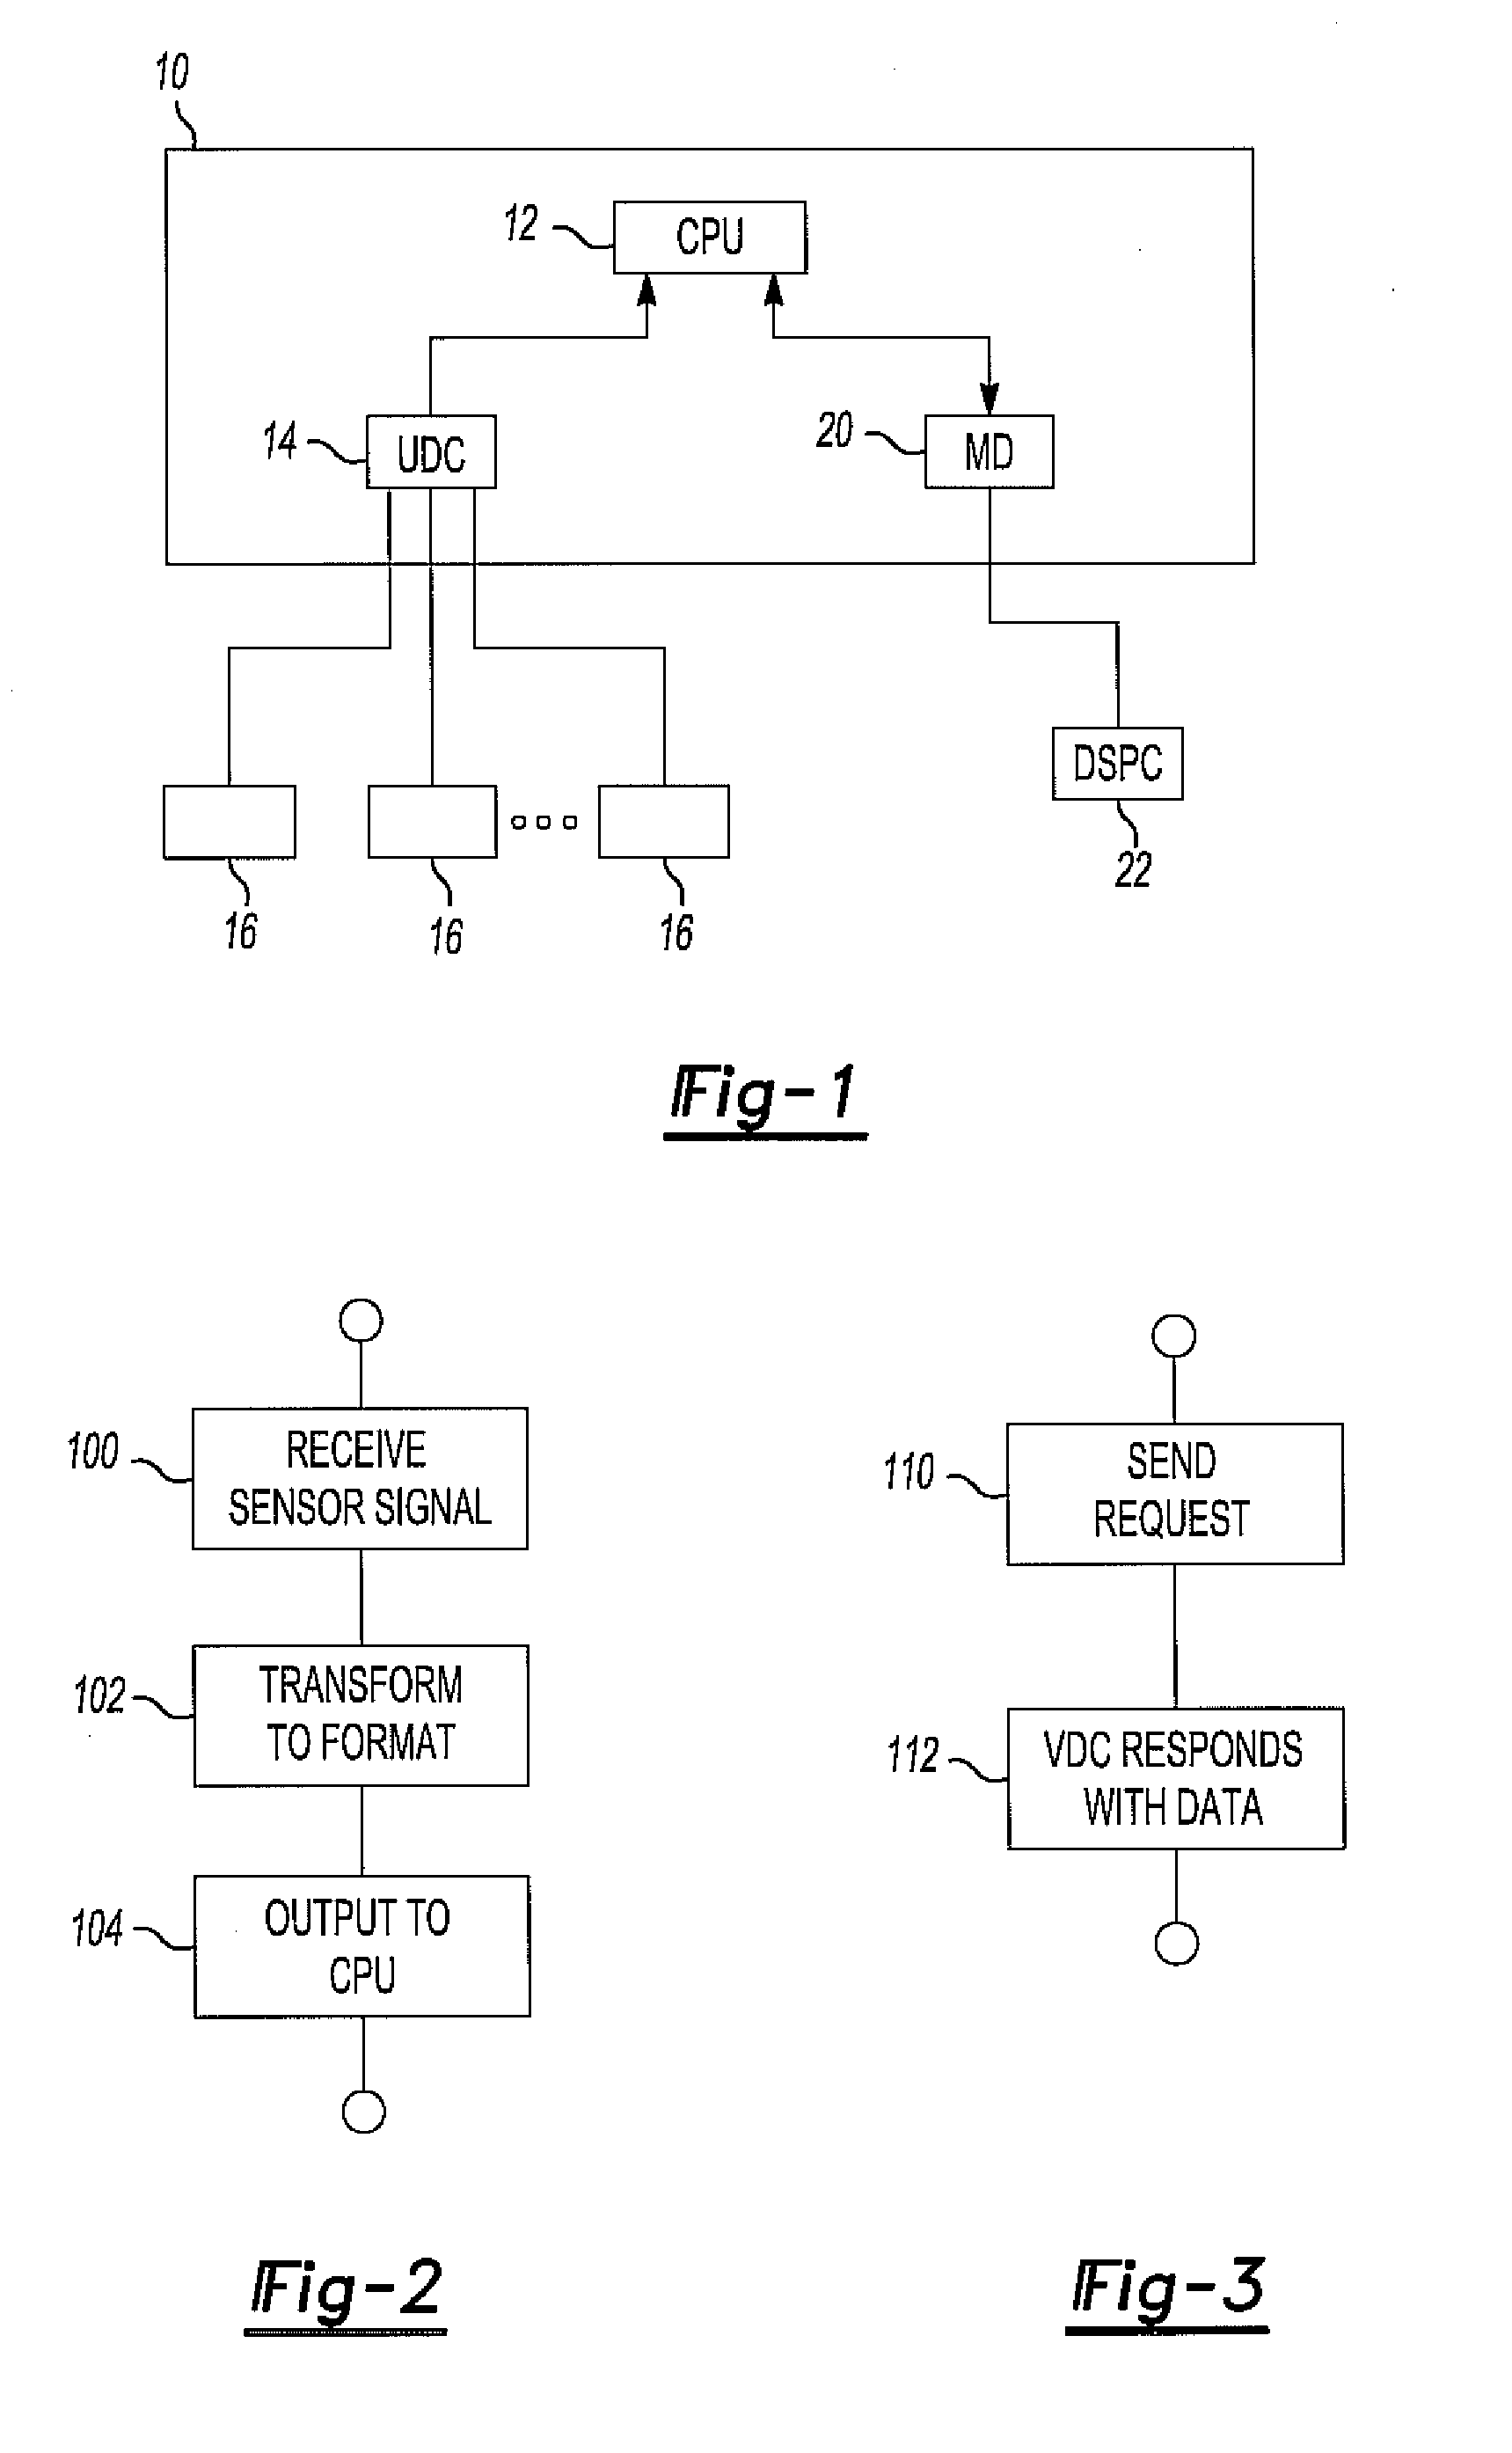 Computing platform for multiple intelligent transportation systems in an automotive vehicle